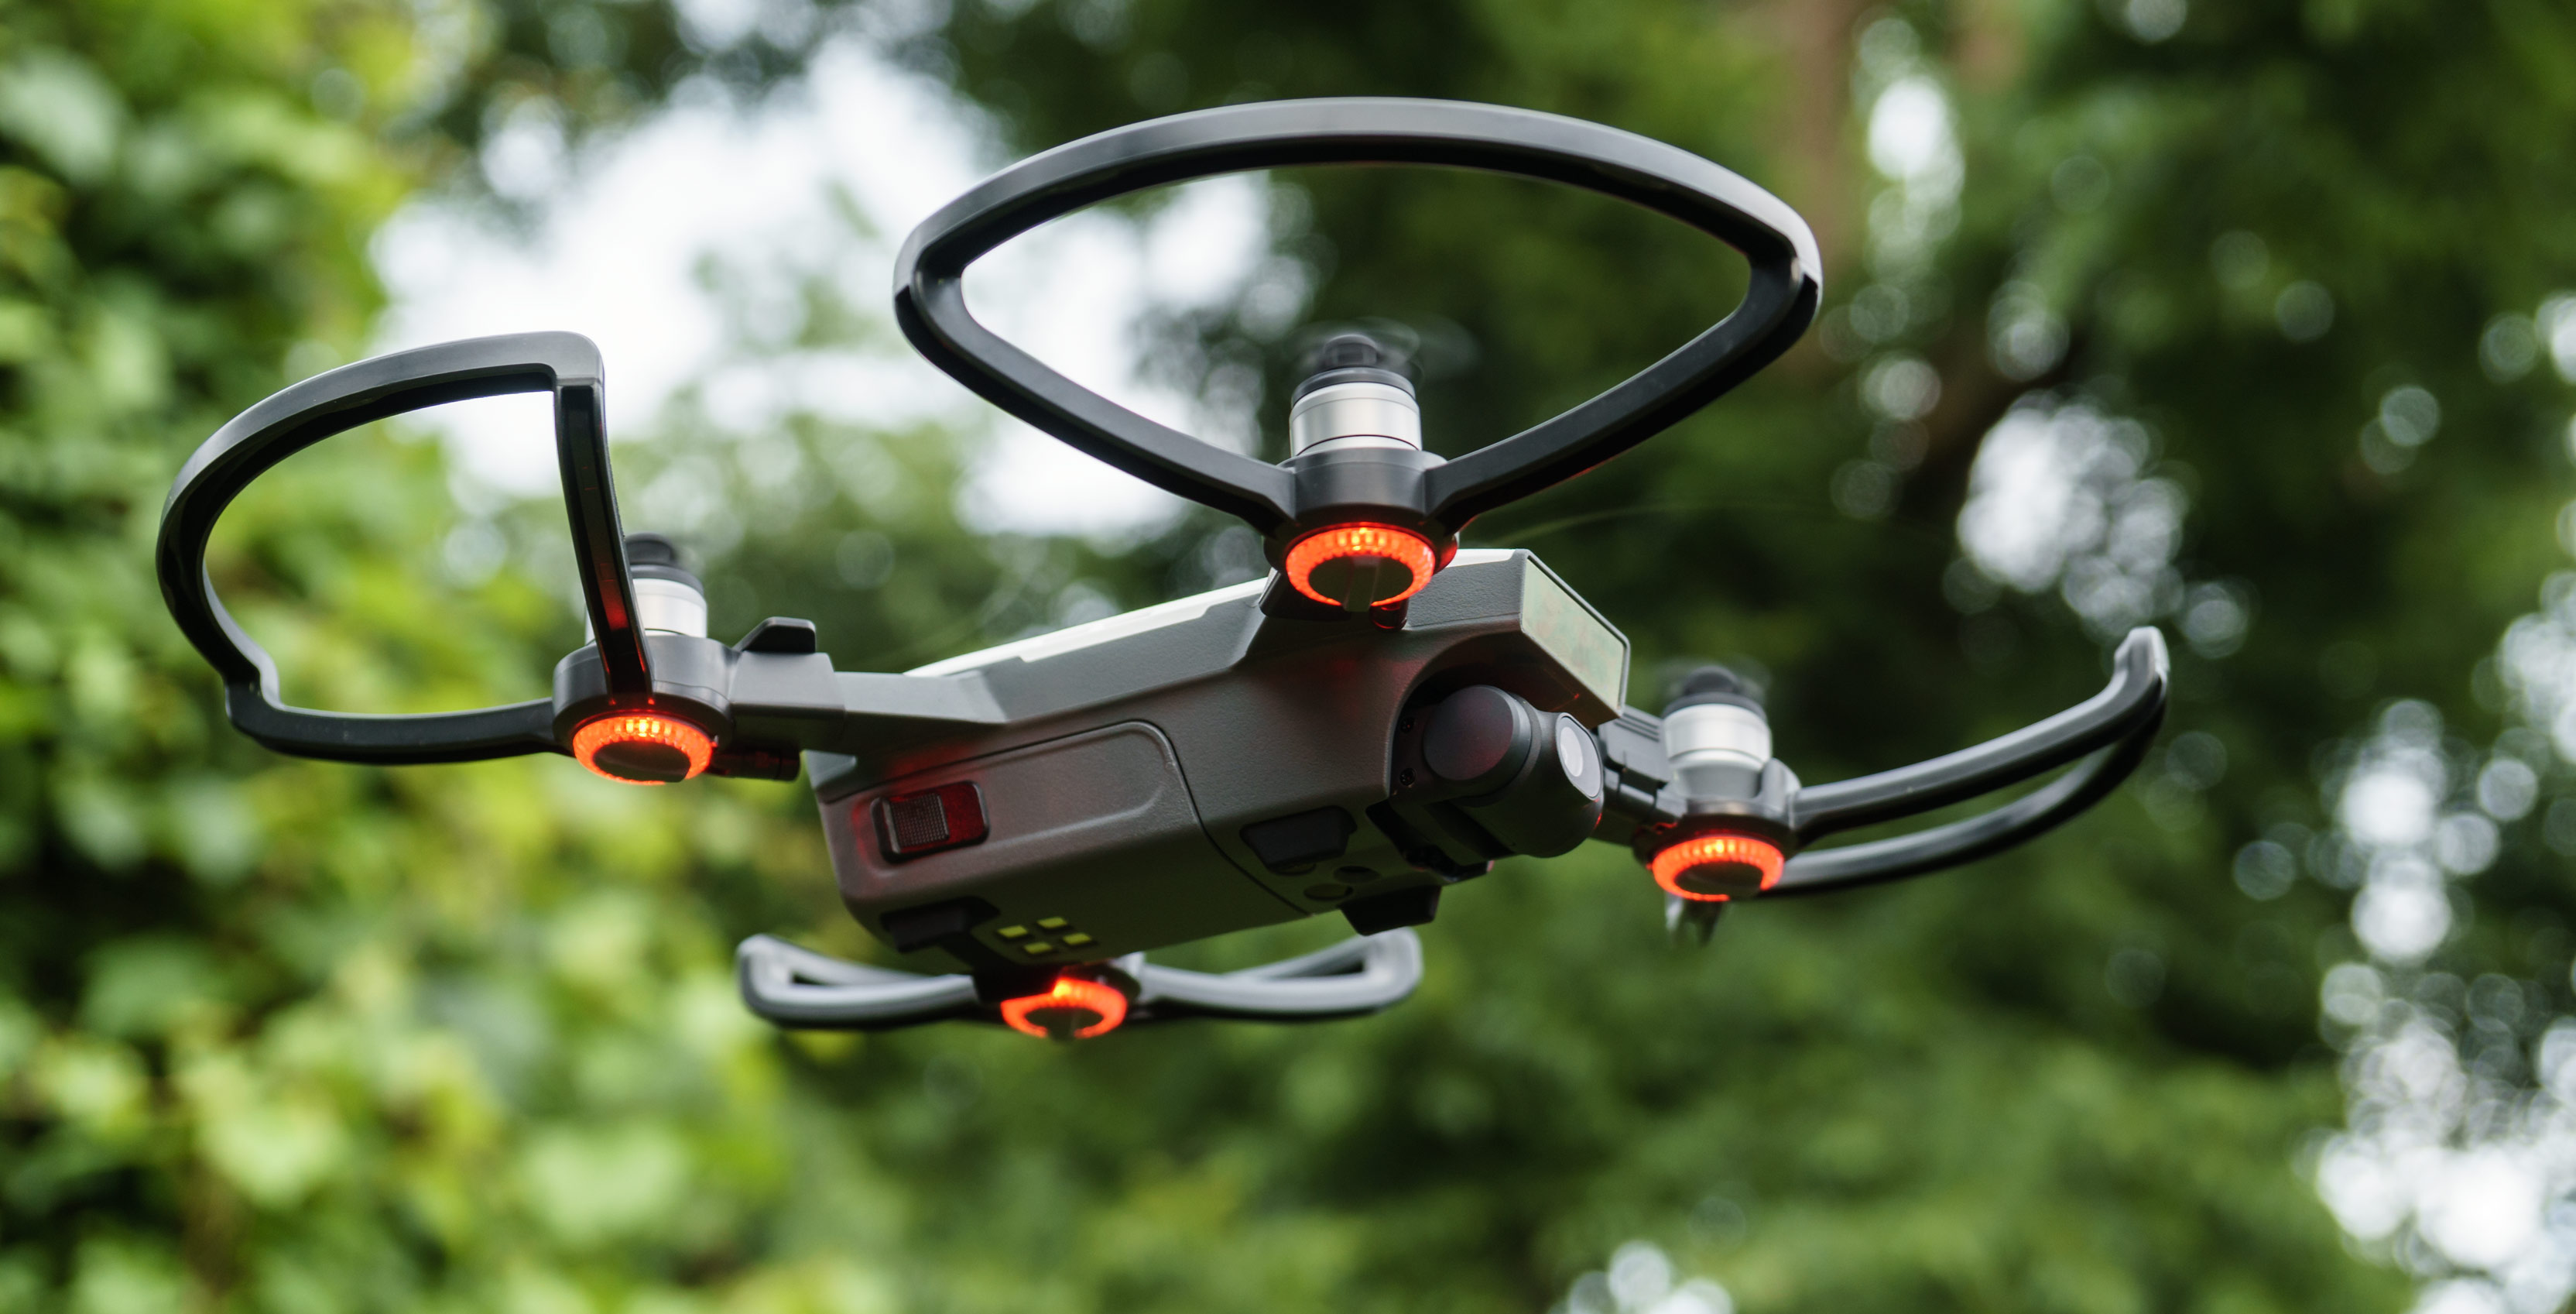 DJI wants future drone pilots to pass a test before taking to the skies